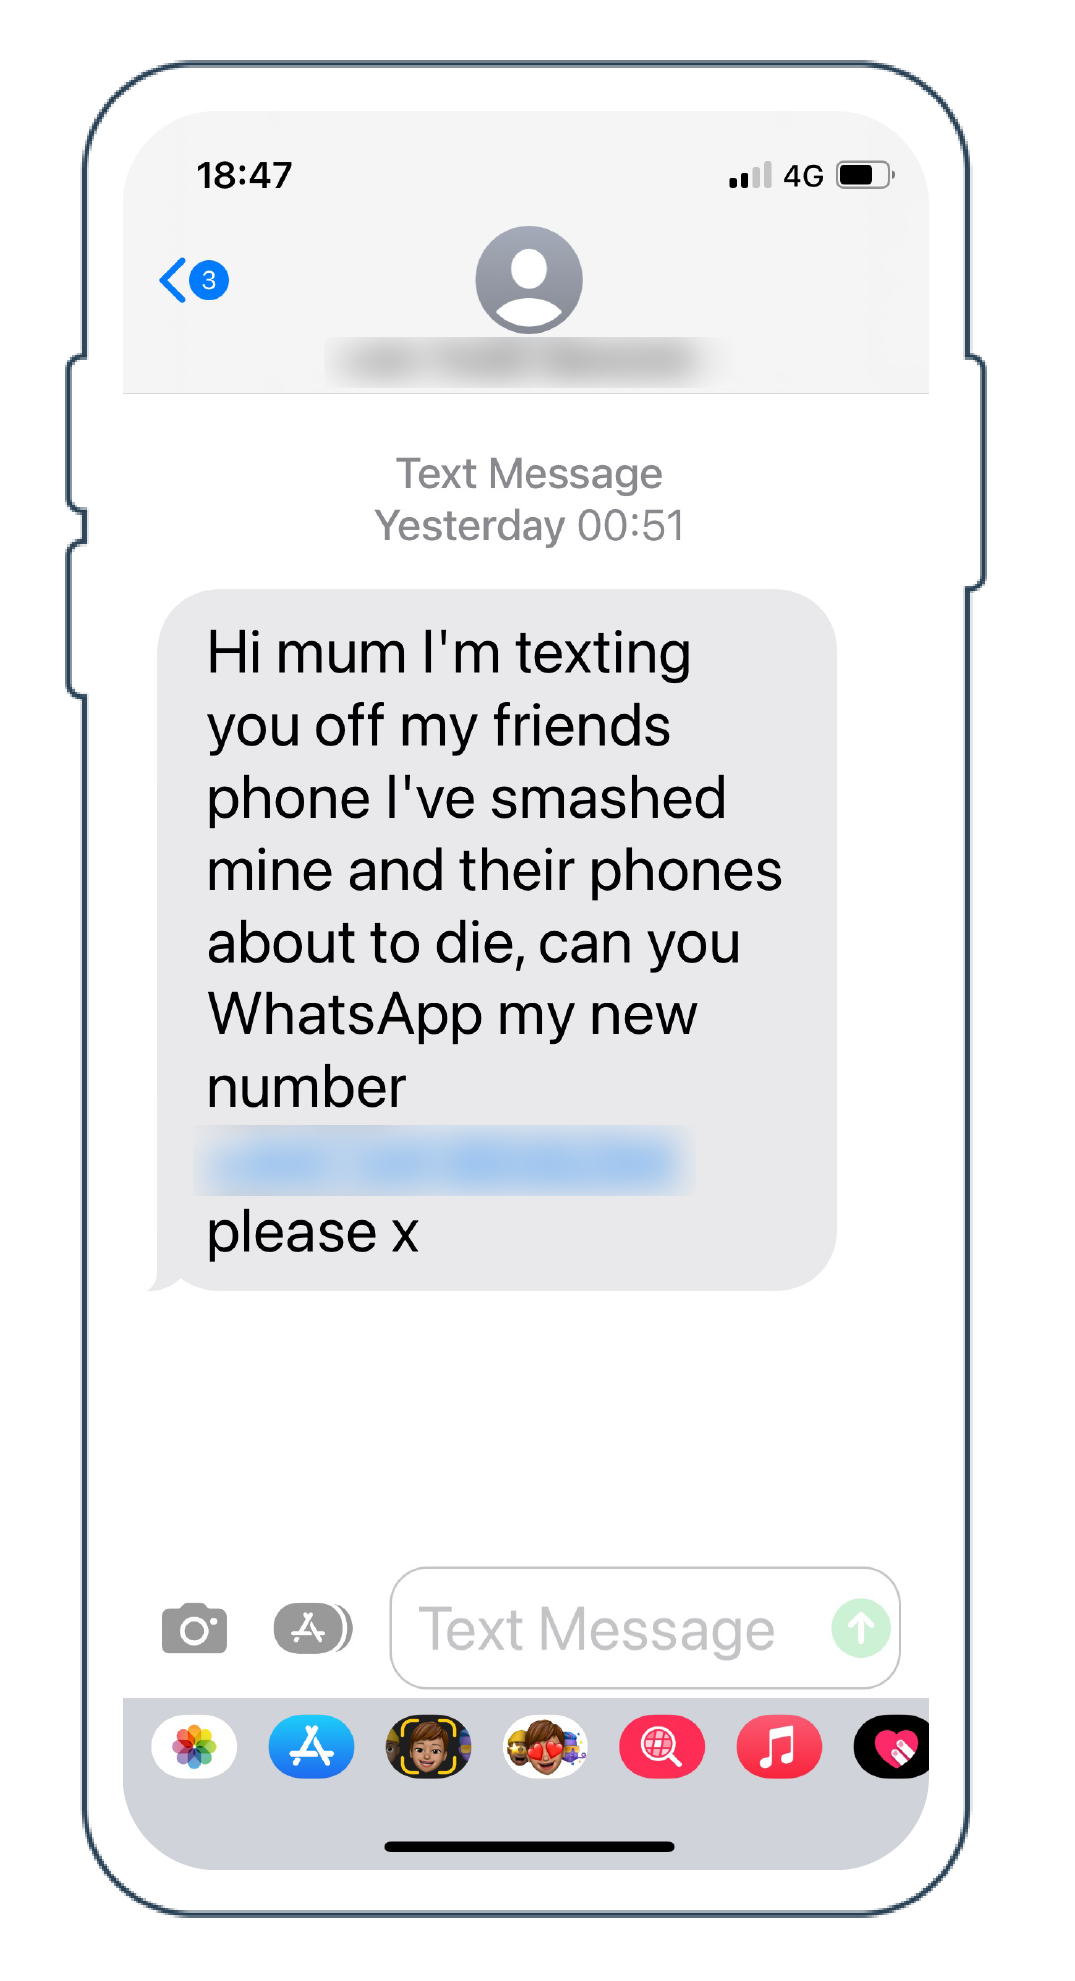 scam text message asking for mum to message their WhatsApp